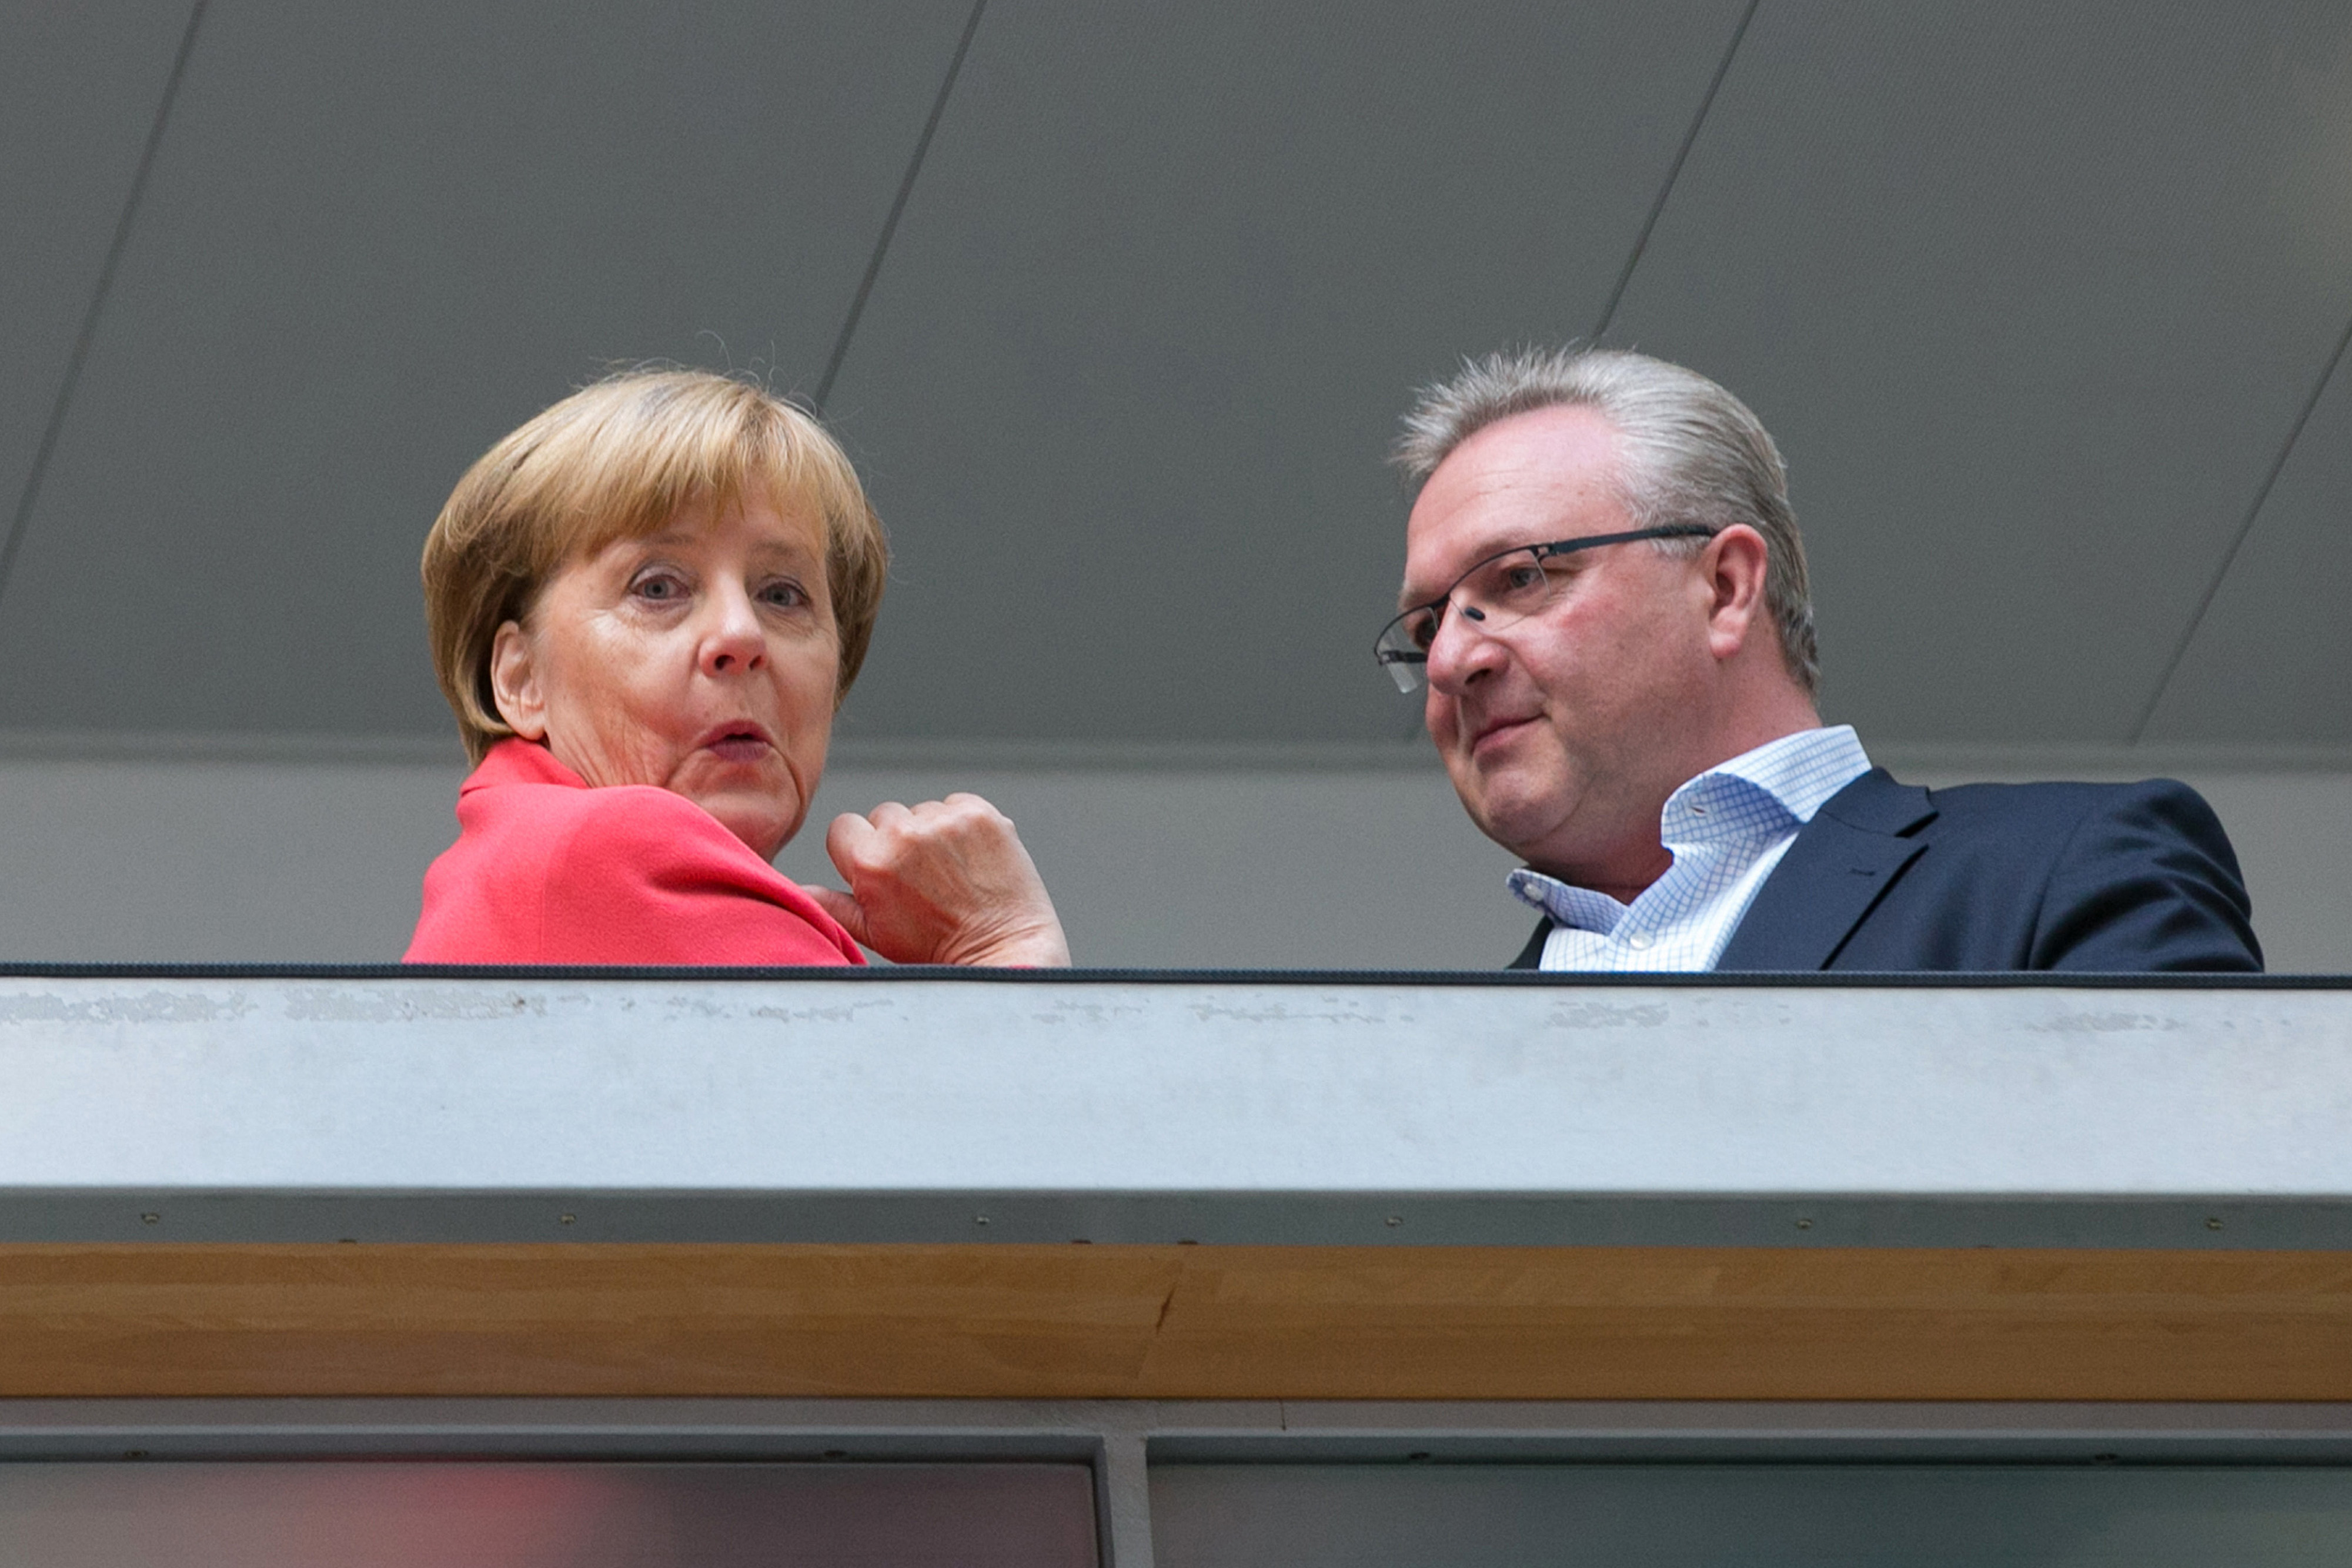 Angela Merkel, Germany's chancellor and Christian Democratic Union (CDU) party leader, left, reacts as she stands with Frank Henkel, the CDU candidate in Berlin, ahead of a CDU federal board meeting at the party's headquarters in Berlin, Germany, on Monday, Sept. 19, 2016.